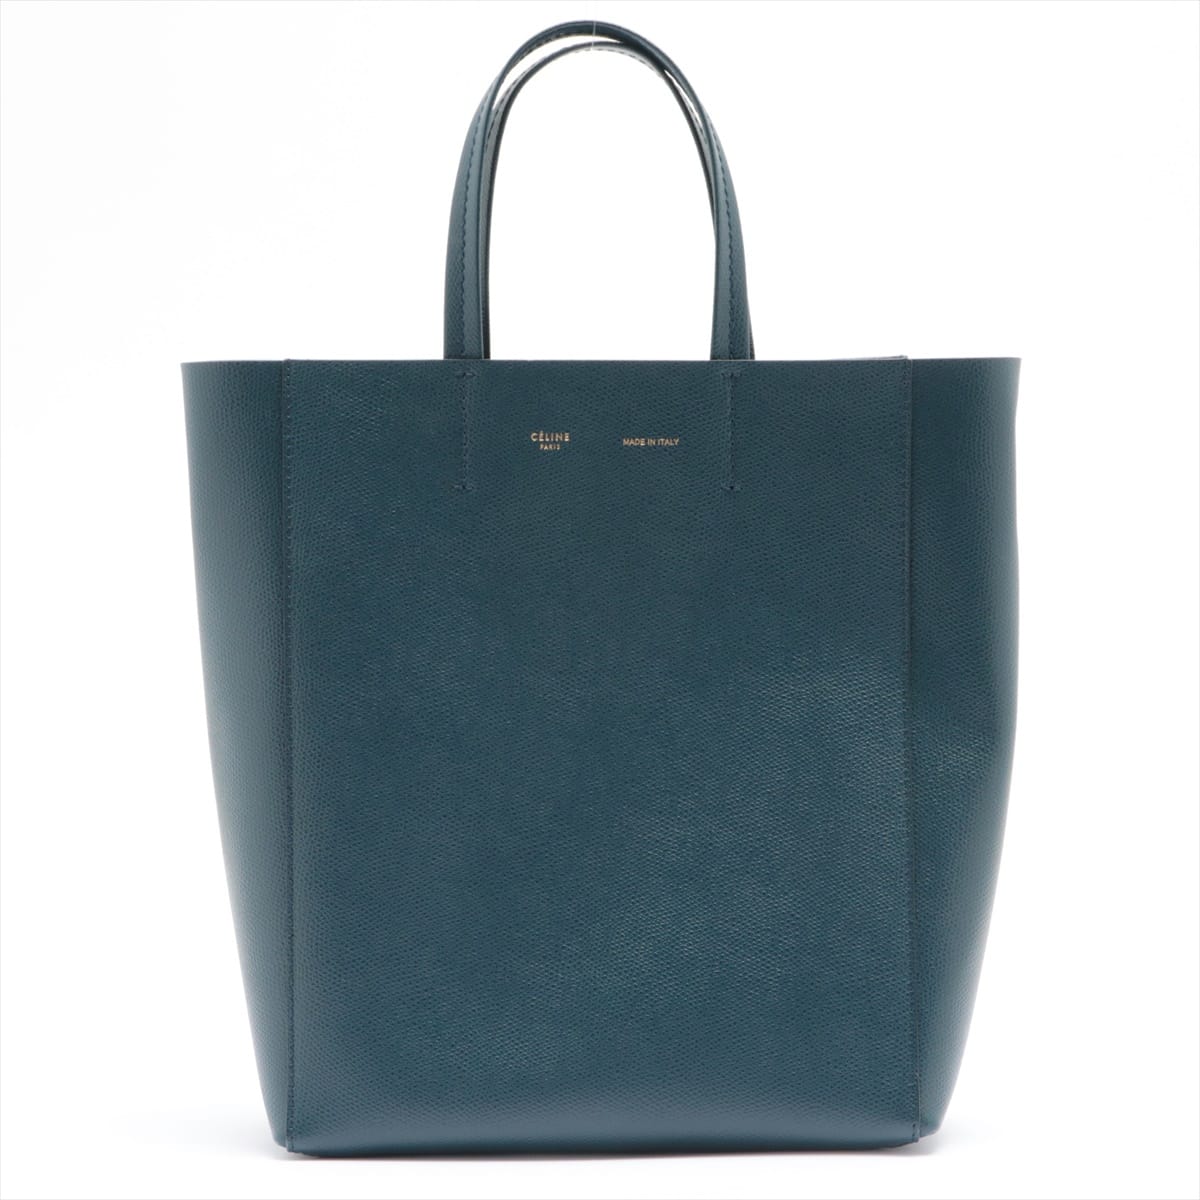 CELINE Vertical Cabas Small Leather 2 way tote bag Navy blue